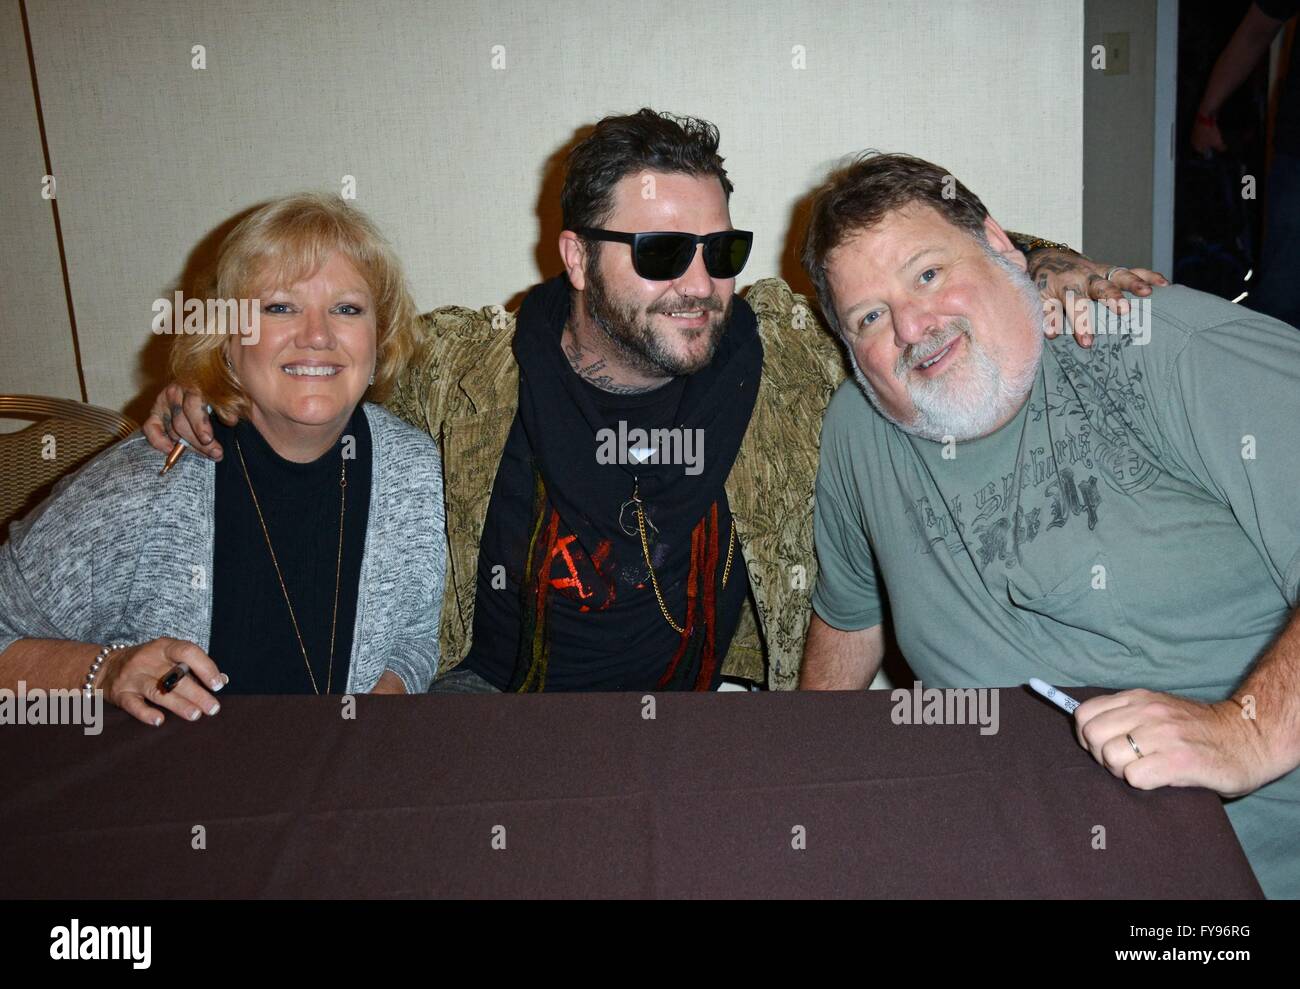 Parsippany, NJ, USA. 23rd Apr, 2016. Bam Margera with parents April Margera, Phil Margera in attendance for Chiller Theatre Toy, Model and Film Expo, Sheraton Parsippany, Parsippany, NJ April 23, 2016. Credit:  Derek Storm/Everett Collection/Alamy Live News Stock Photo